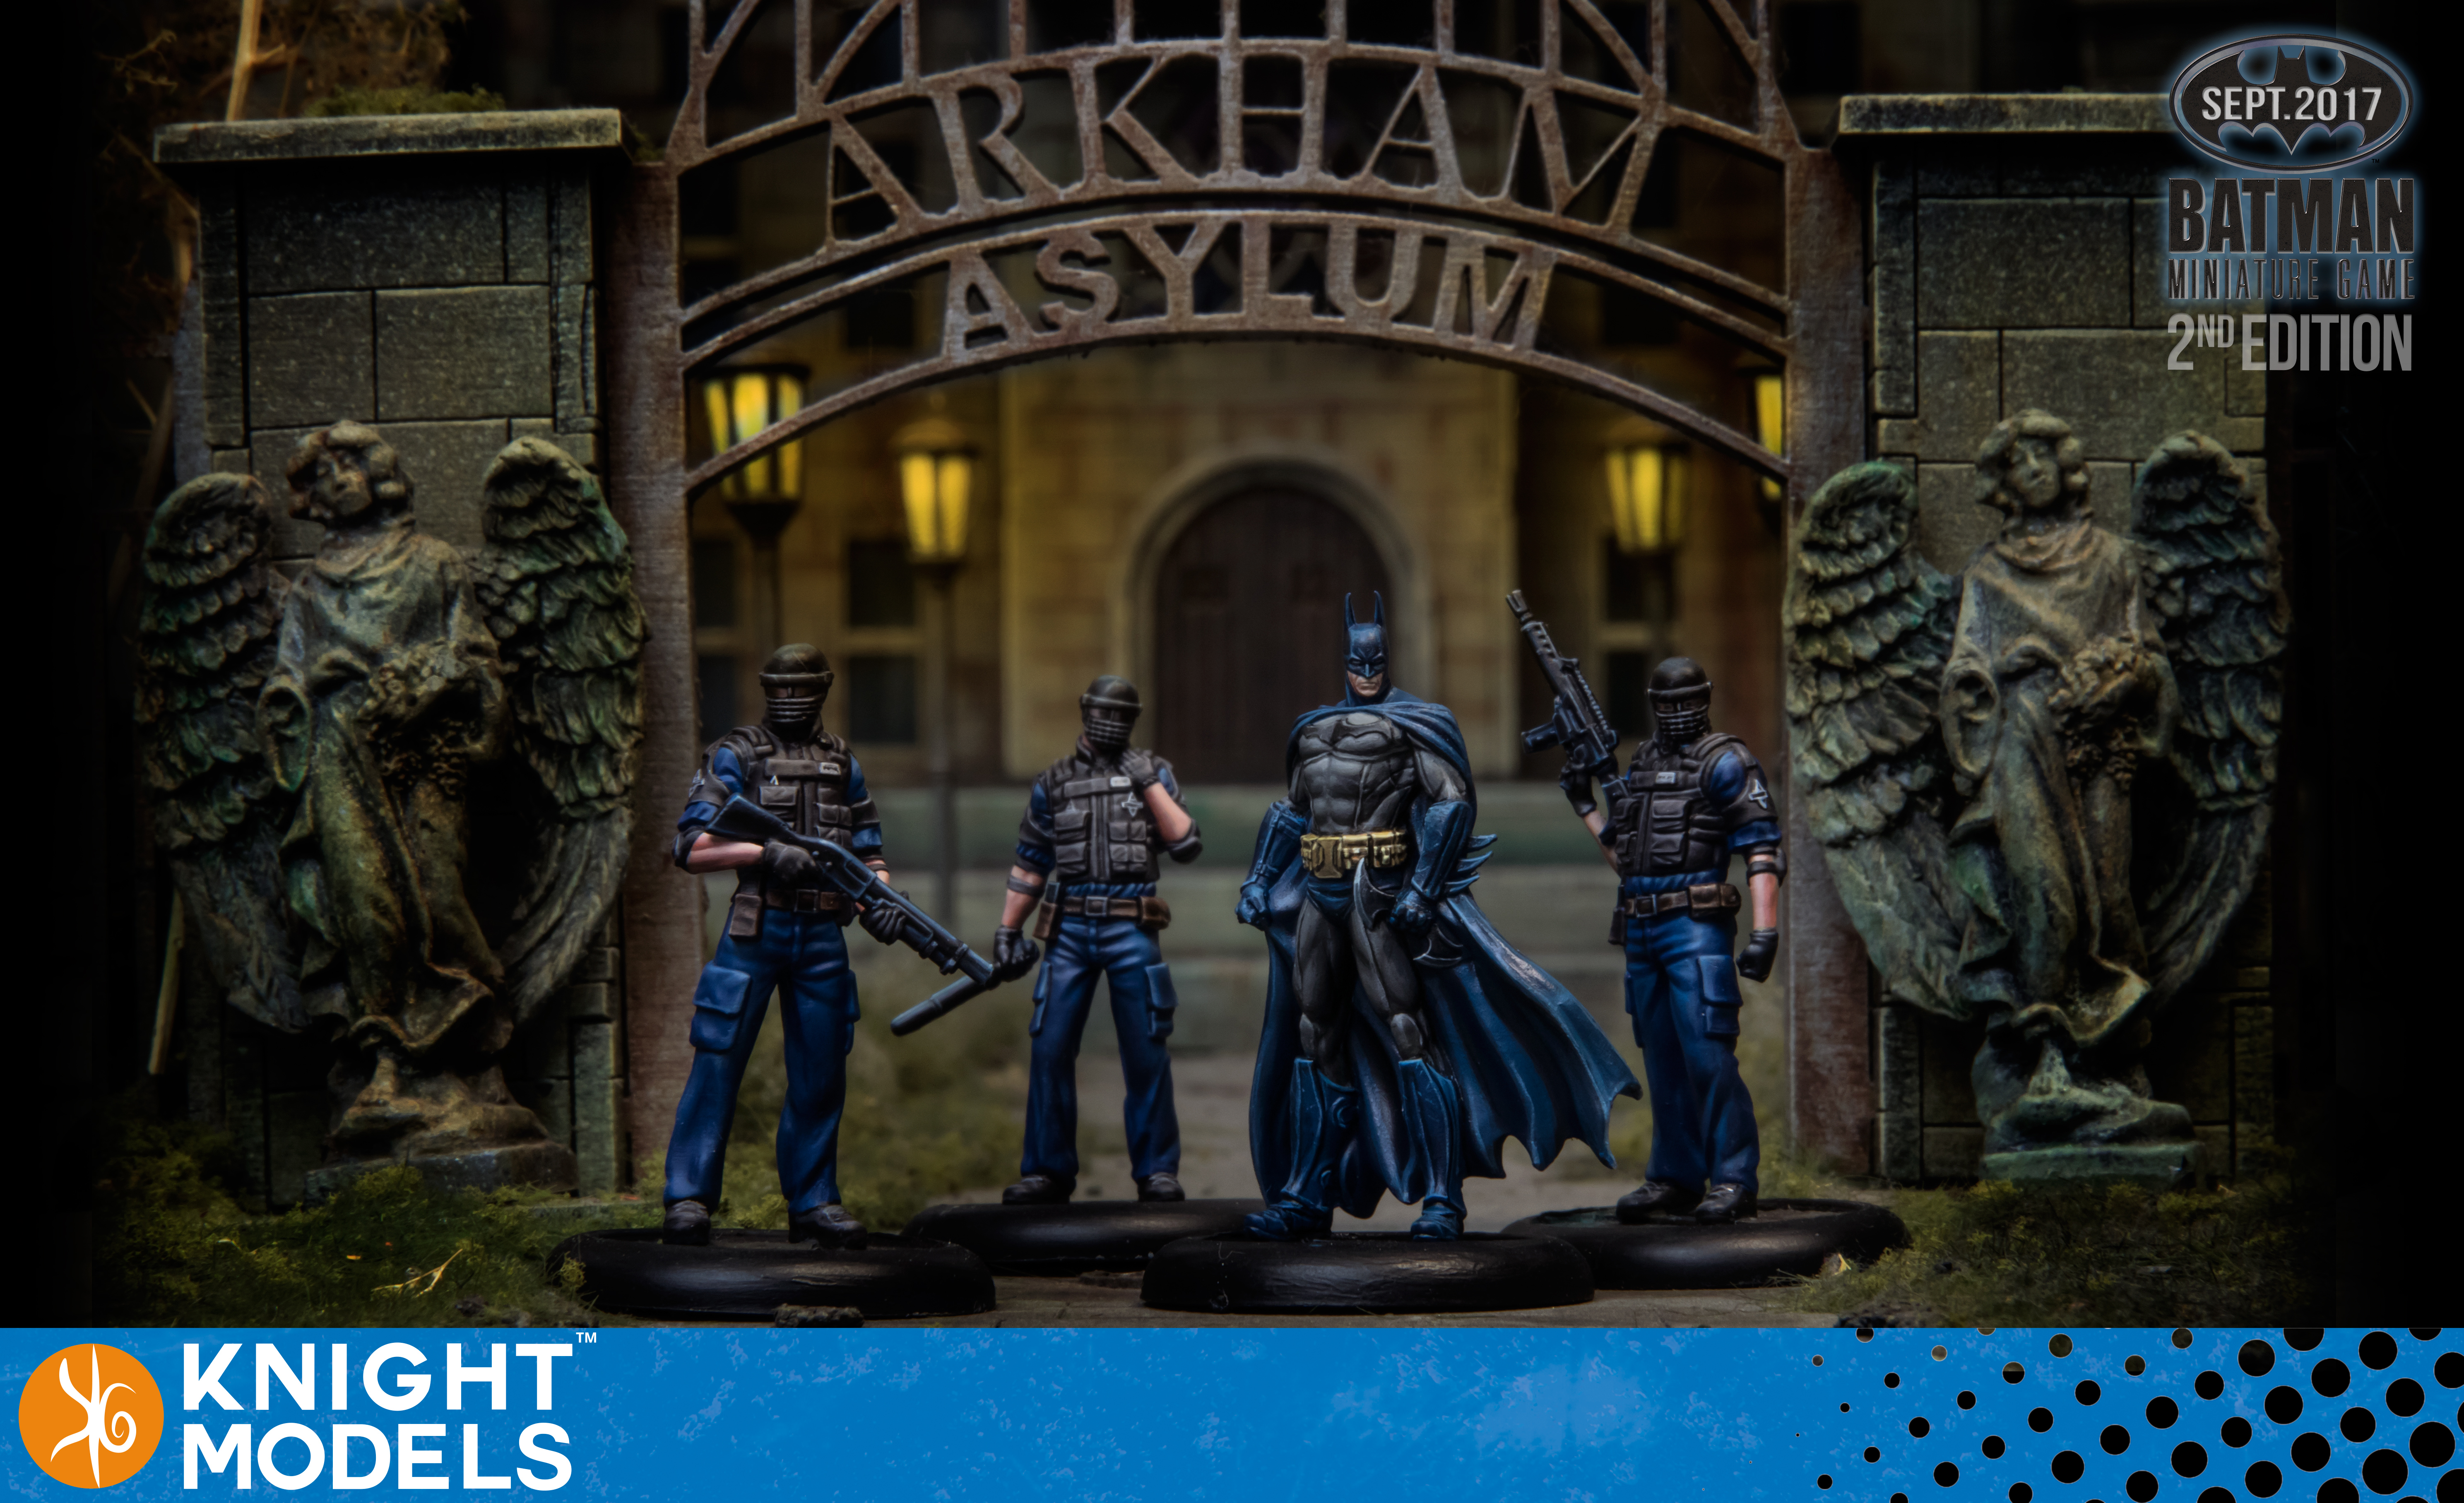 The Batman has arrived to BMG’s 2nd Edition!